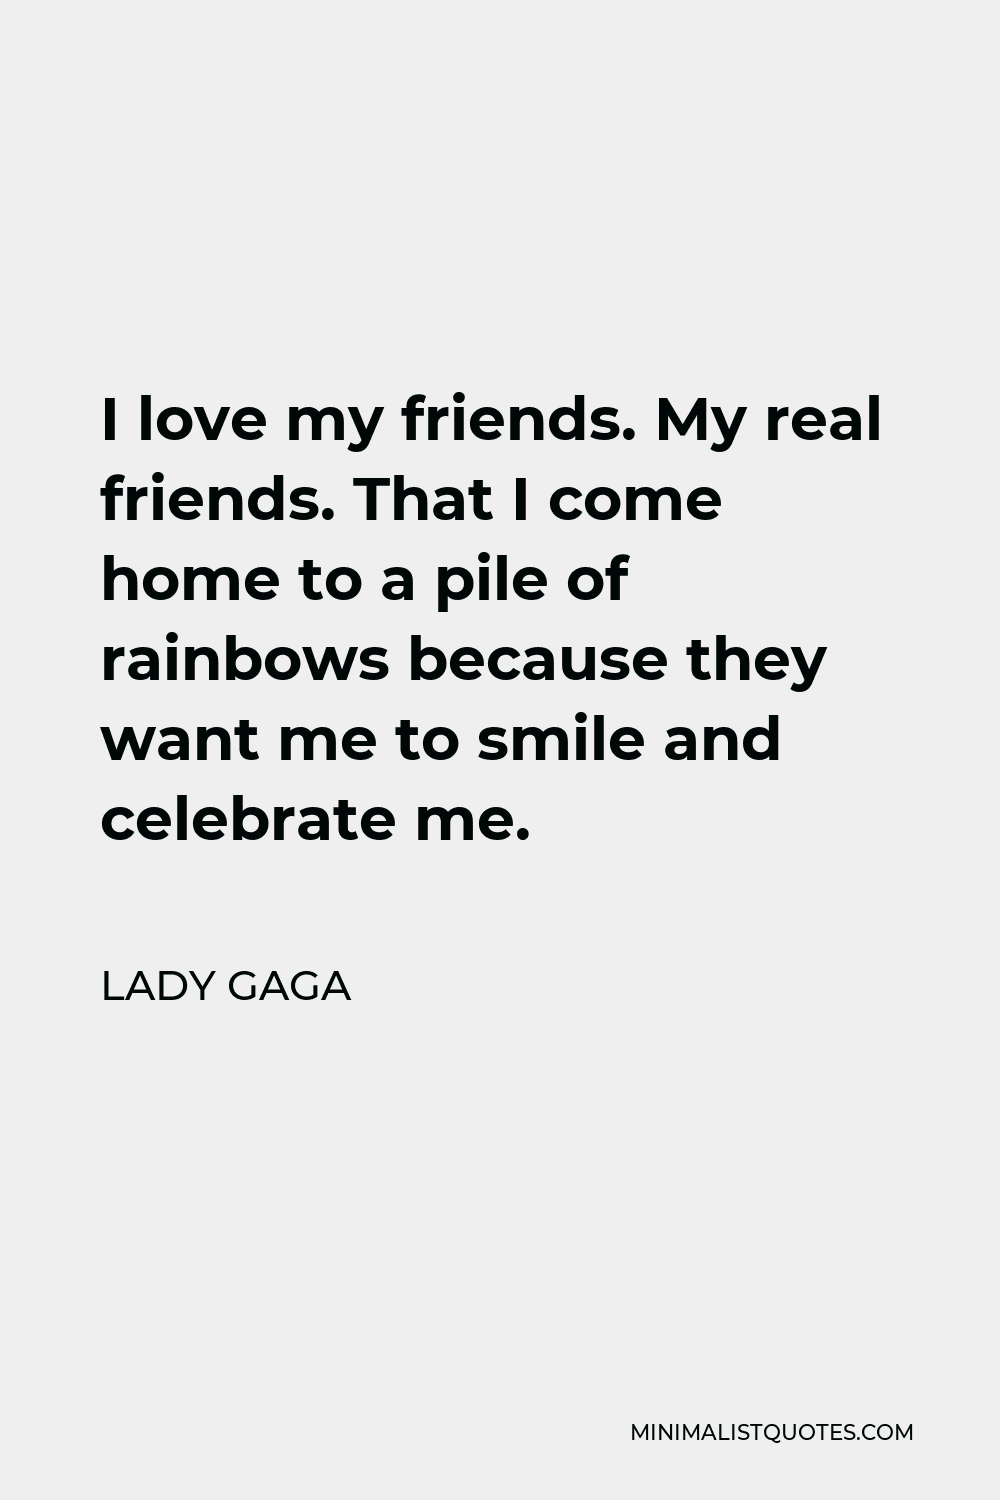 Lady Gaga Quote: I love my friends. My real friends. That I come ...